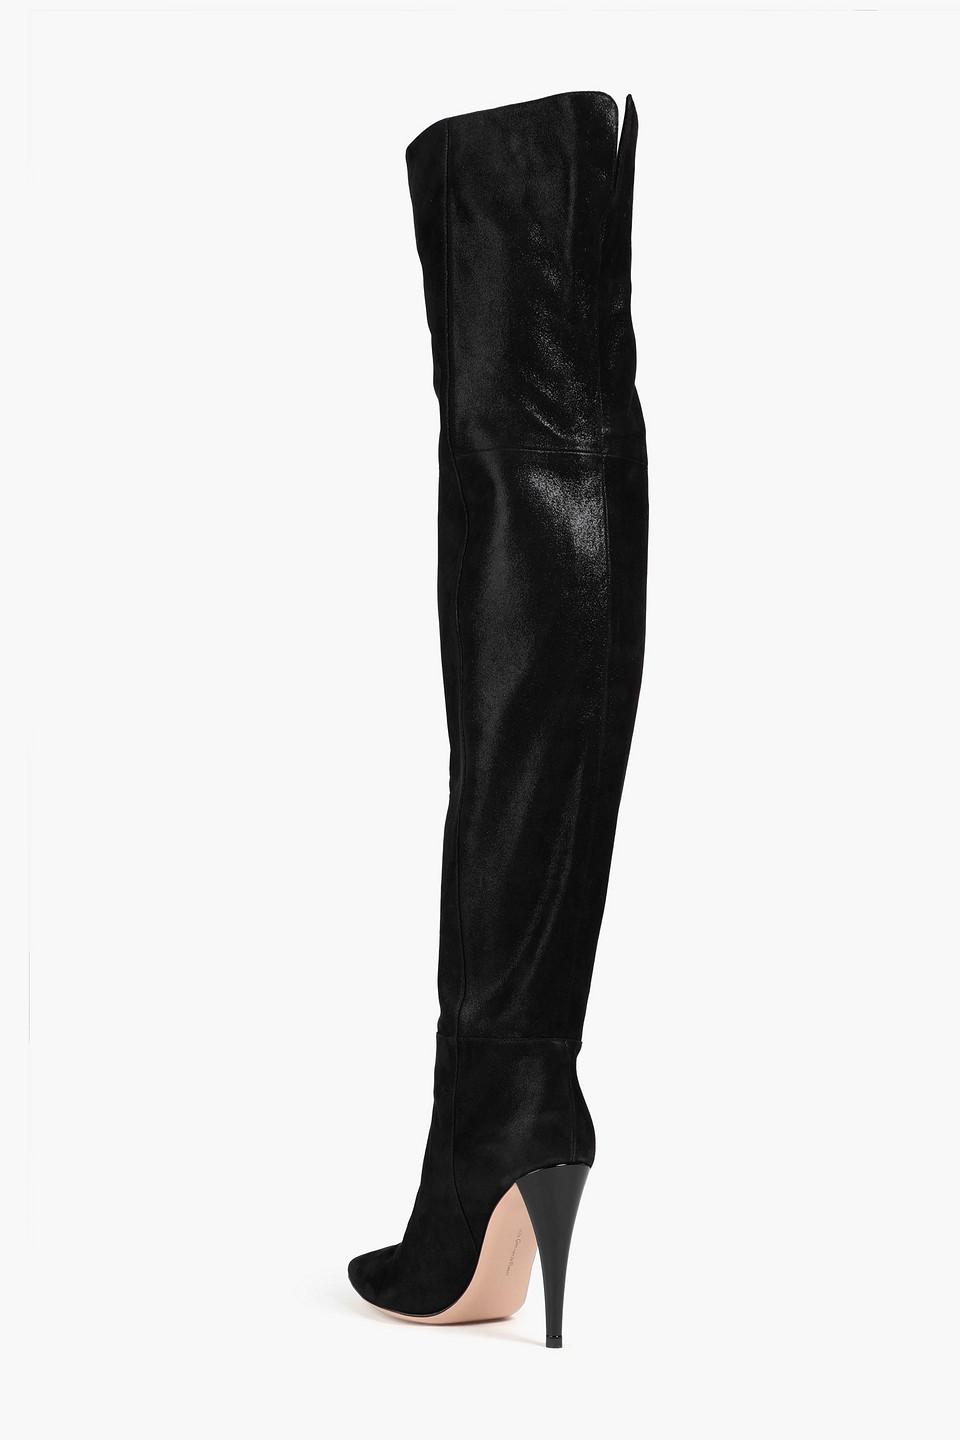 Gianvito Rossi Metallic Suede Thigh Boots in Black | Lyst